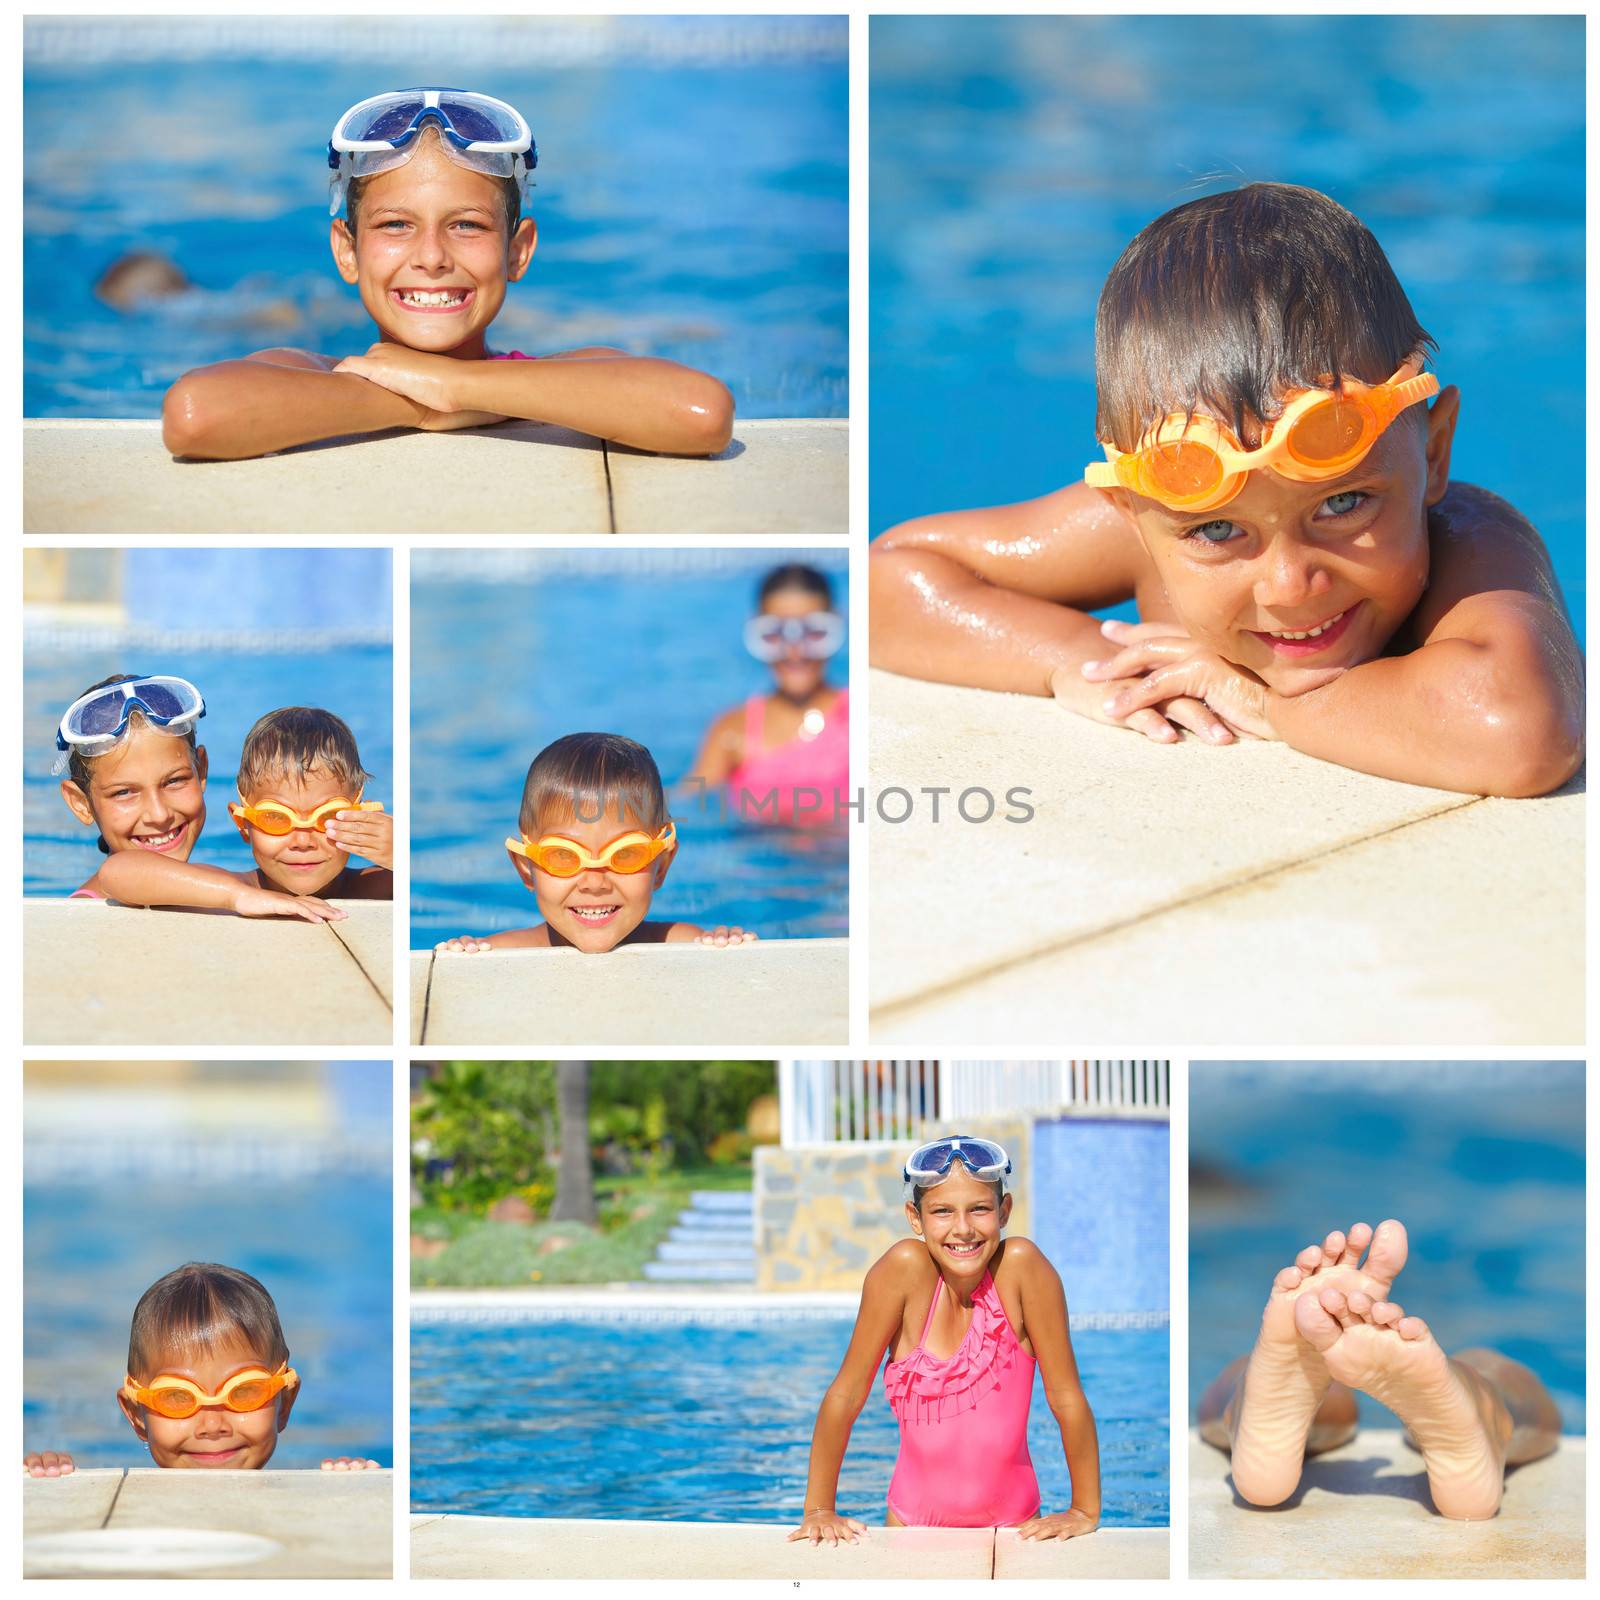 Collage of activities on the pool. Cute kids in swimming pool